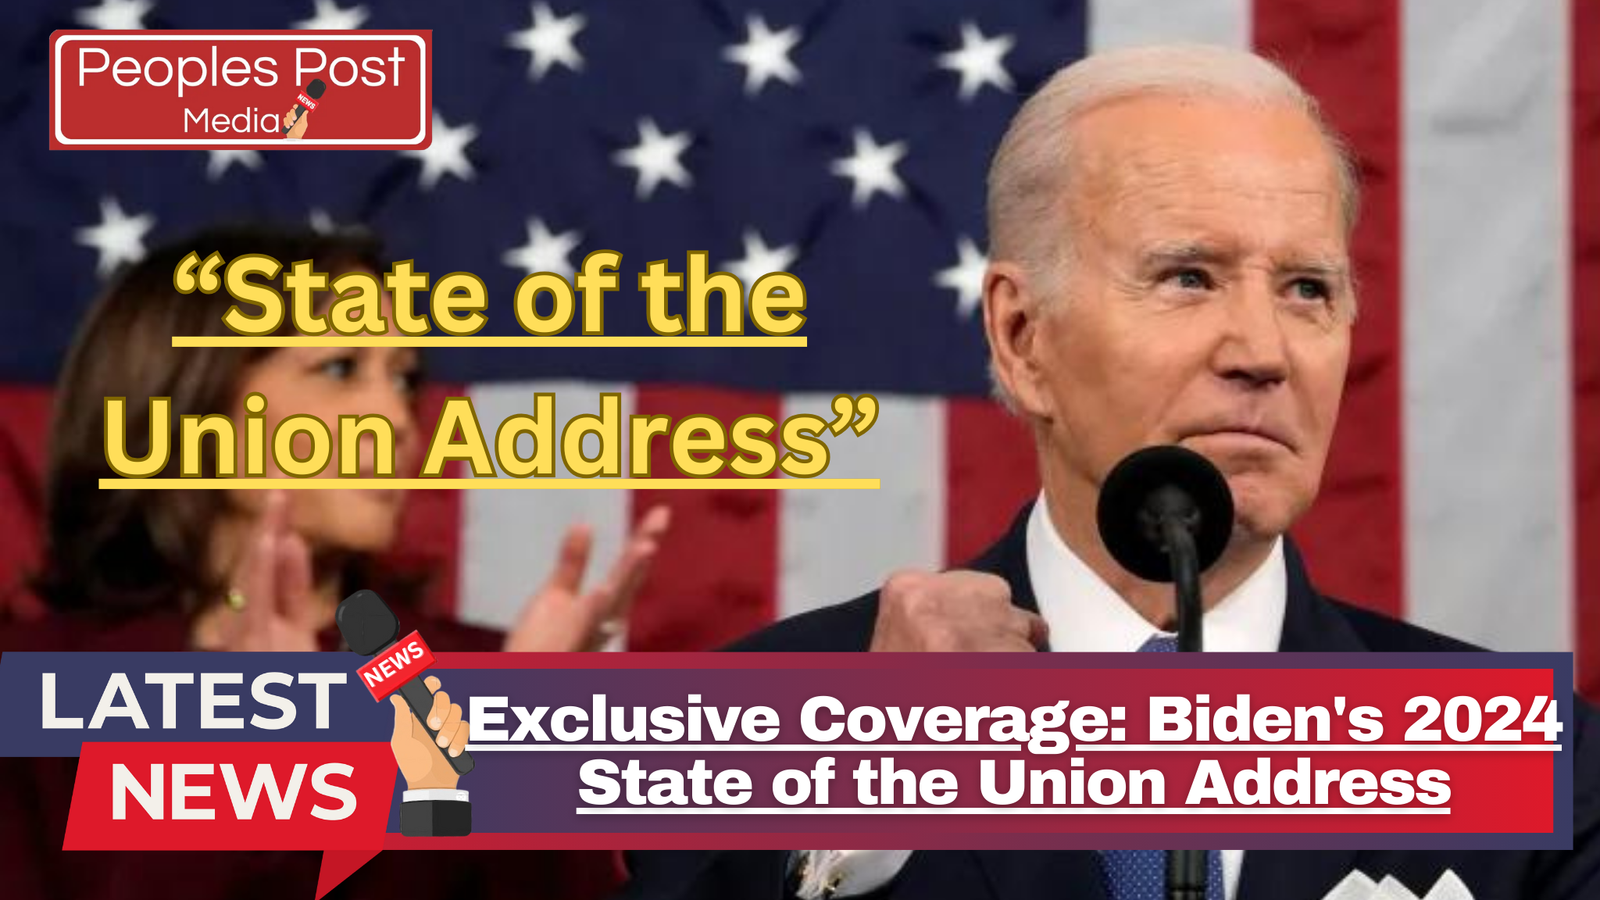 Exclusive Coverage: Biden's 2024 State of the Union Address